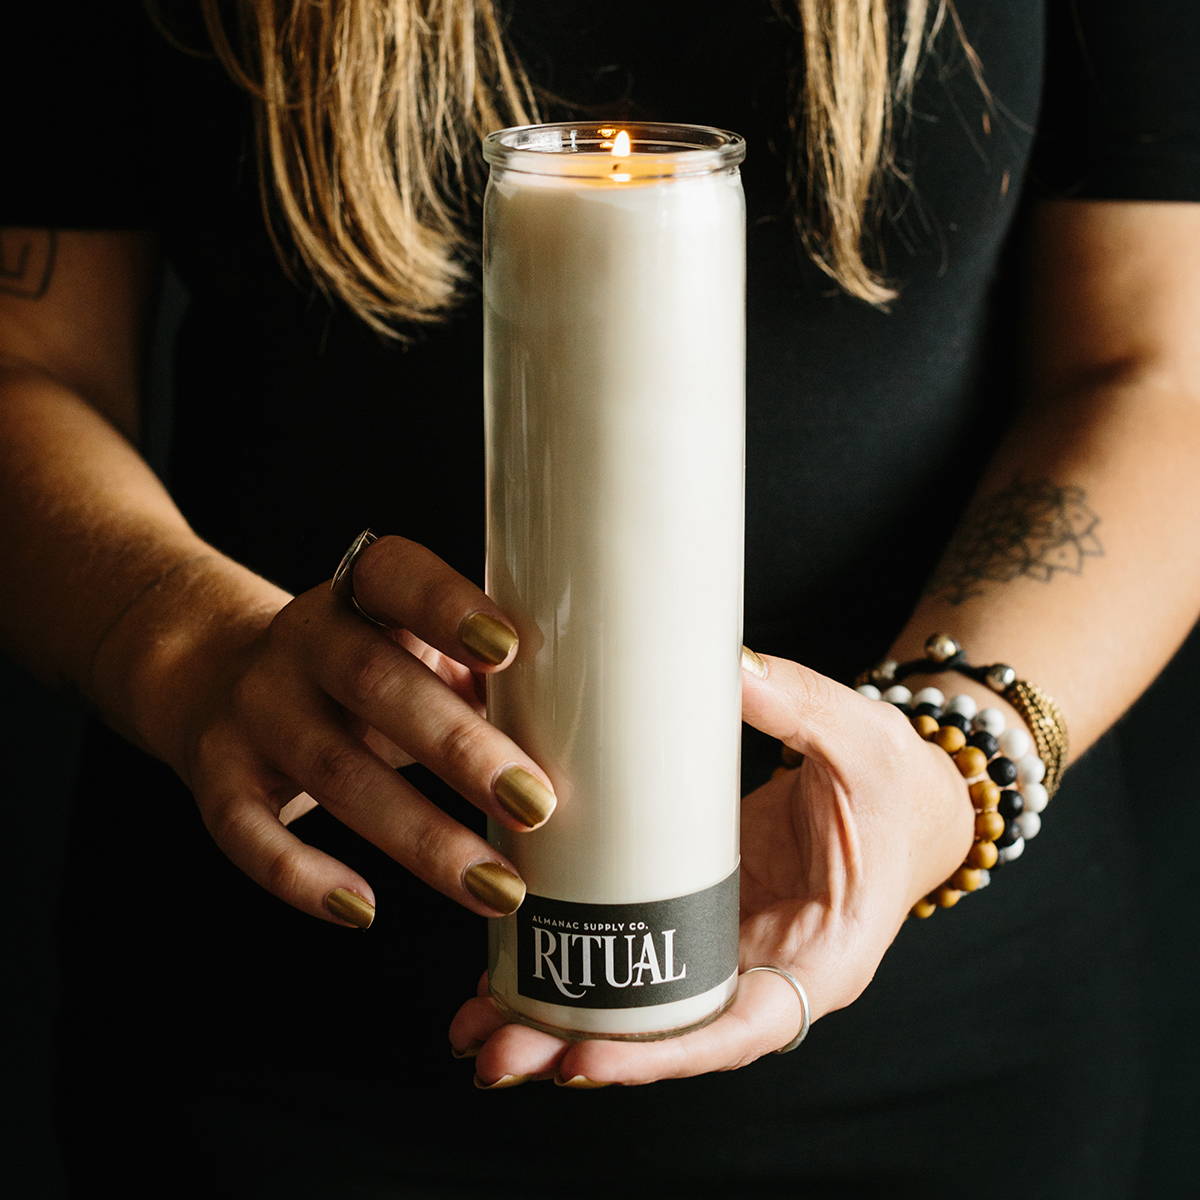 Hands holding a hand-poured ritual candle, making locally in Chattanooga TN